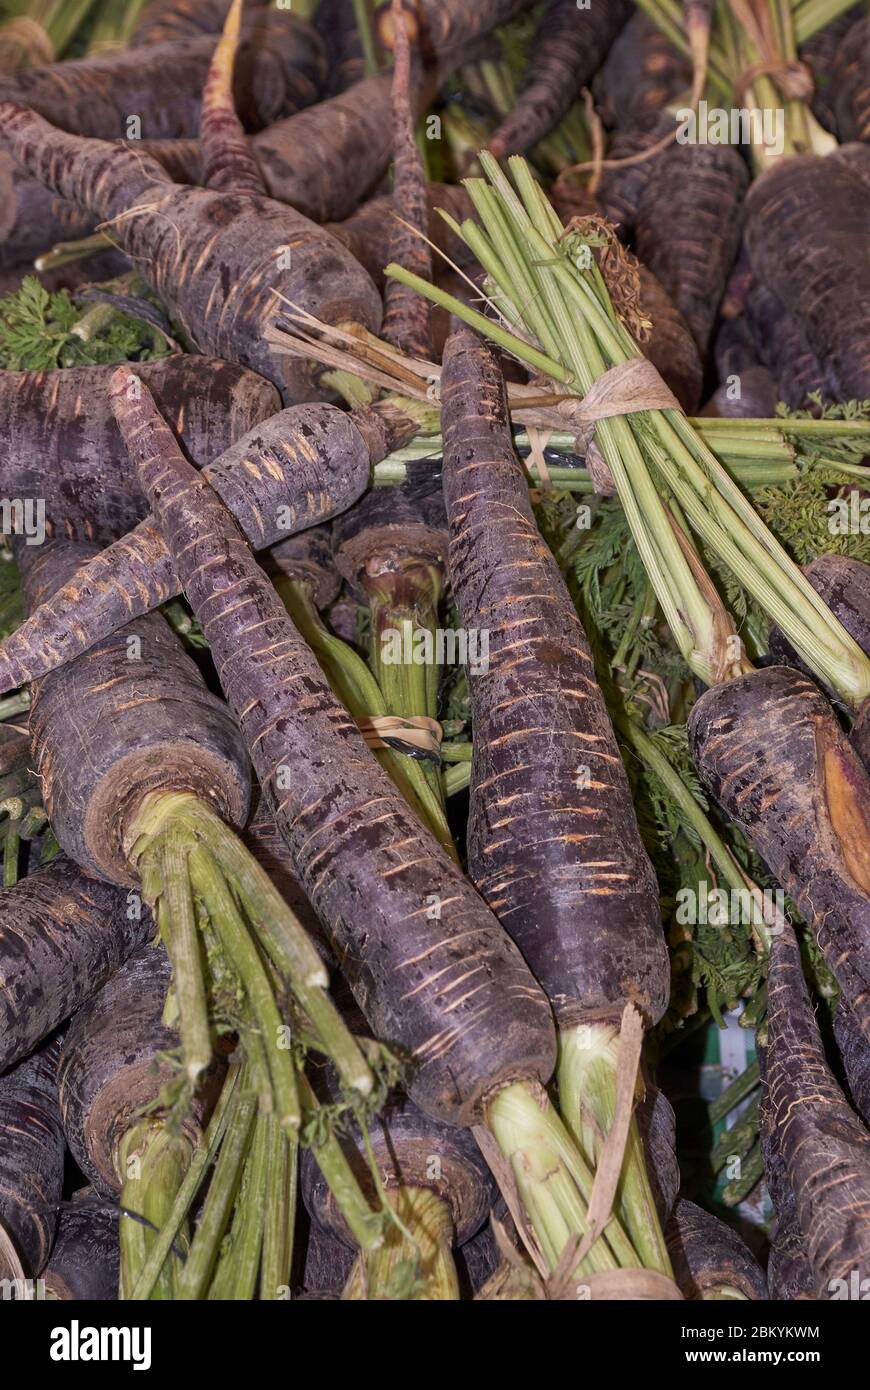 carrot dwells in Cuevas Bajas, Malaga province, Andalusia. Spain Stock Photo